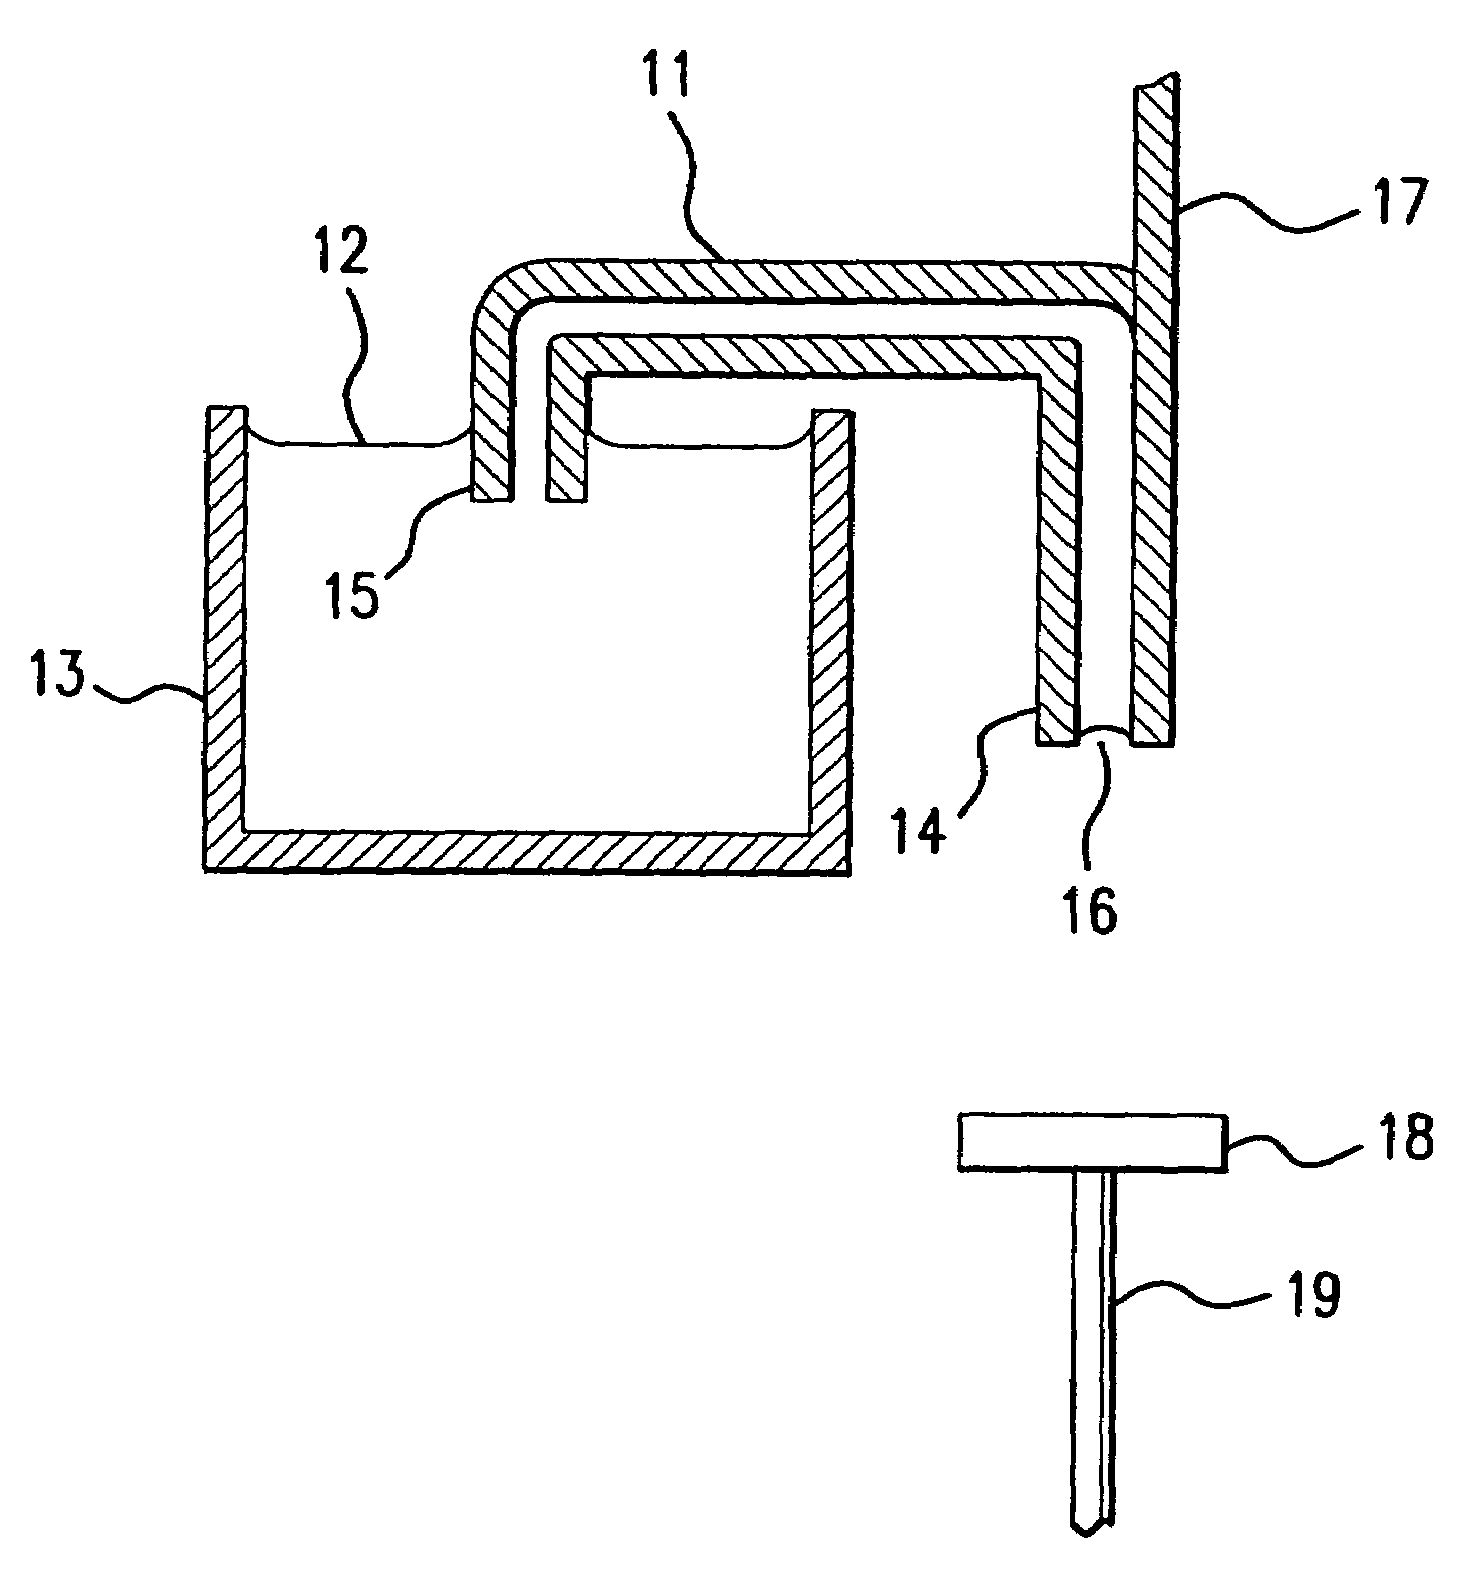 Electrohydrodynamic coating fluid delivery apparatus and method